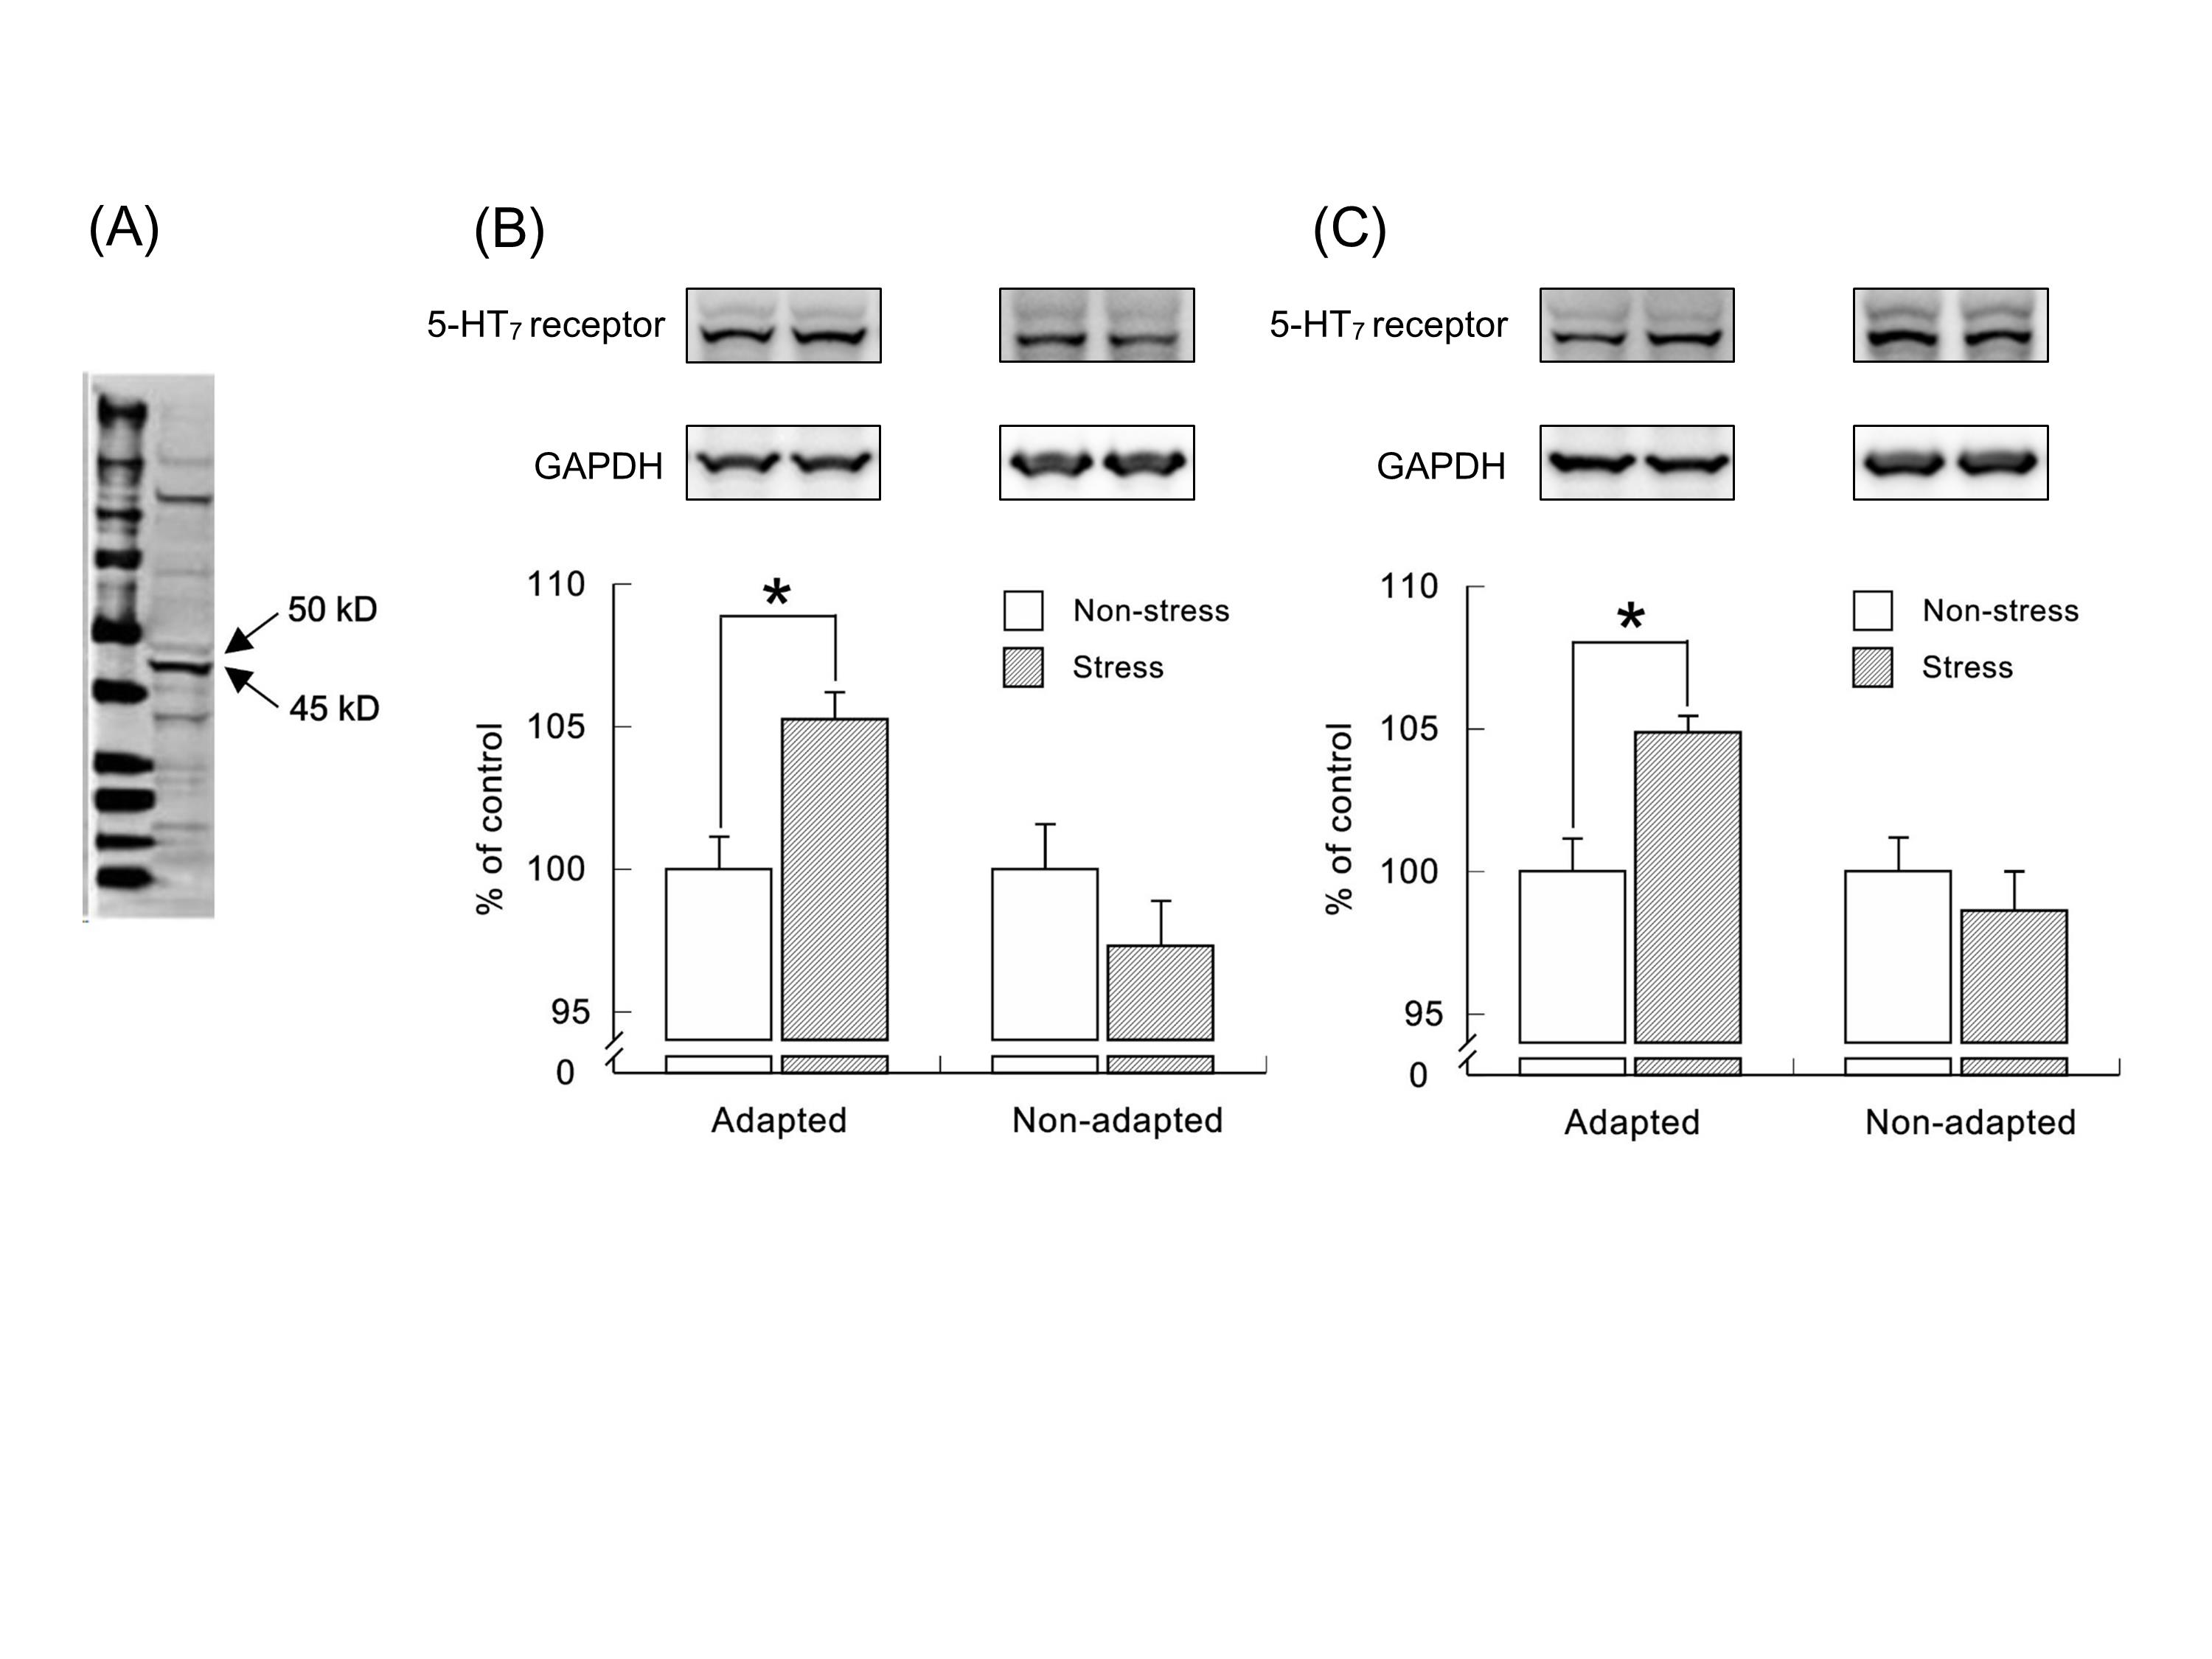 Changes in 5-HT<sub>7</sub> receptor expression in the frontal cortex and hippocampus of mice exposed to adaptable or unadaptable stress.